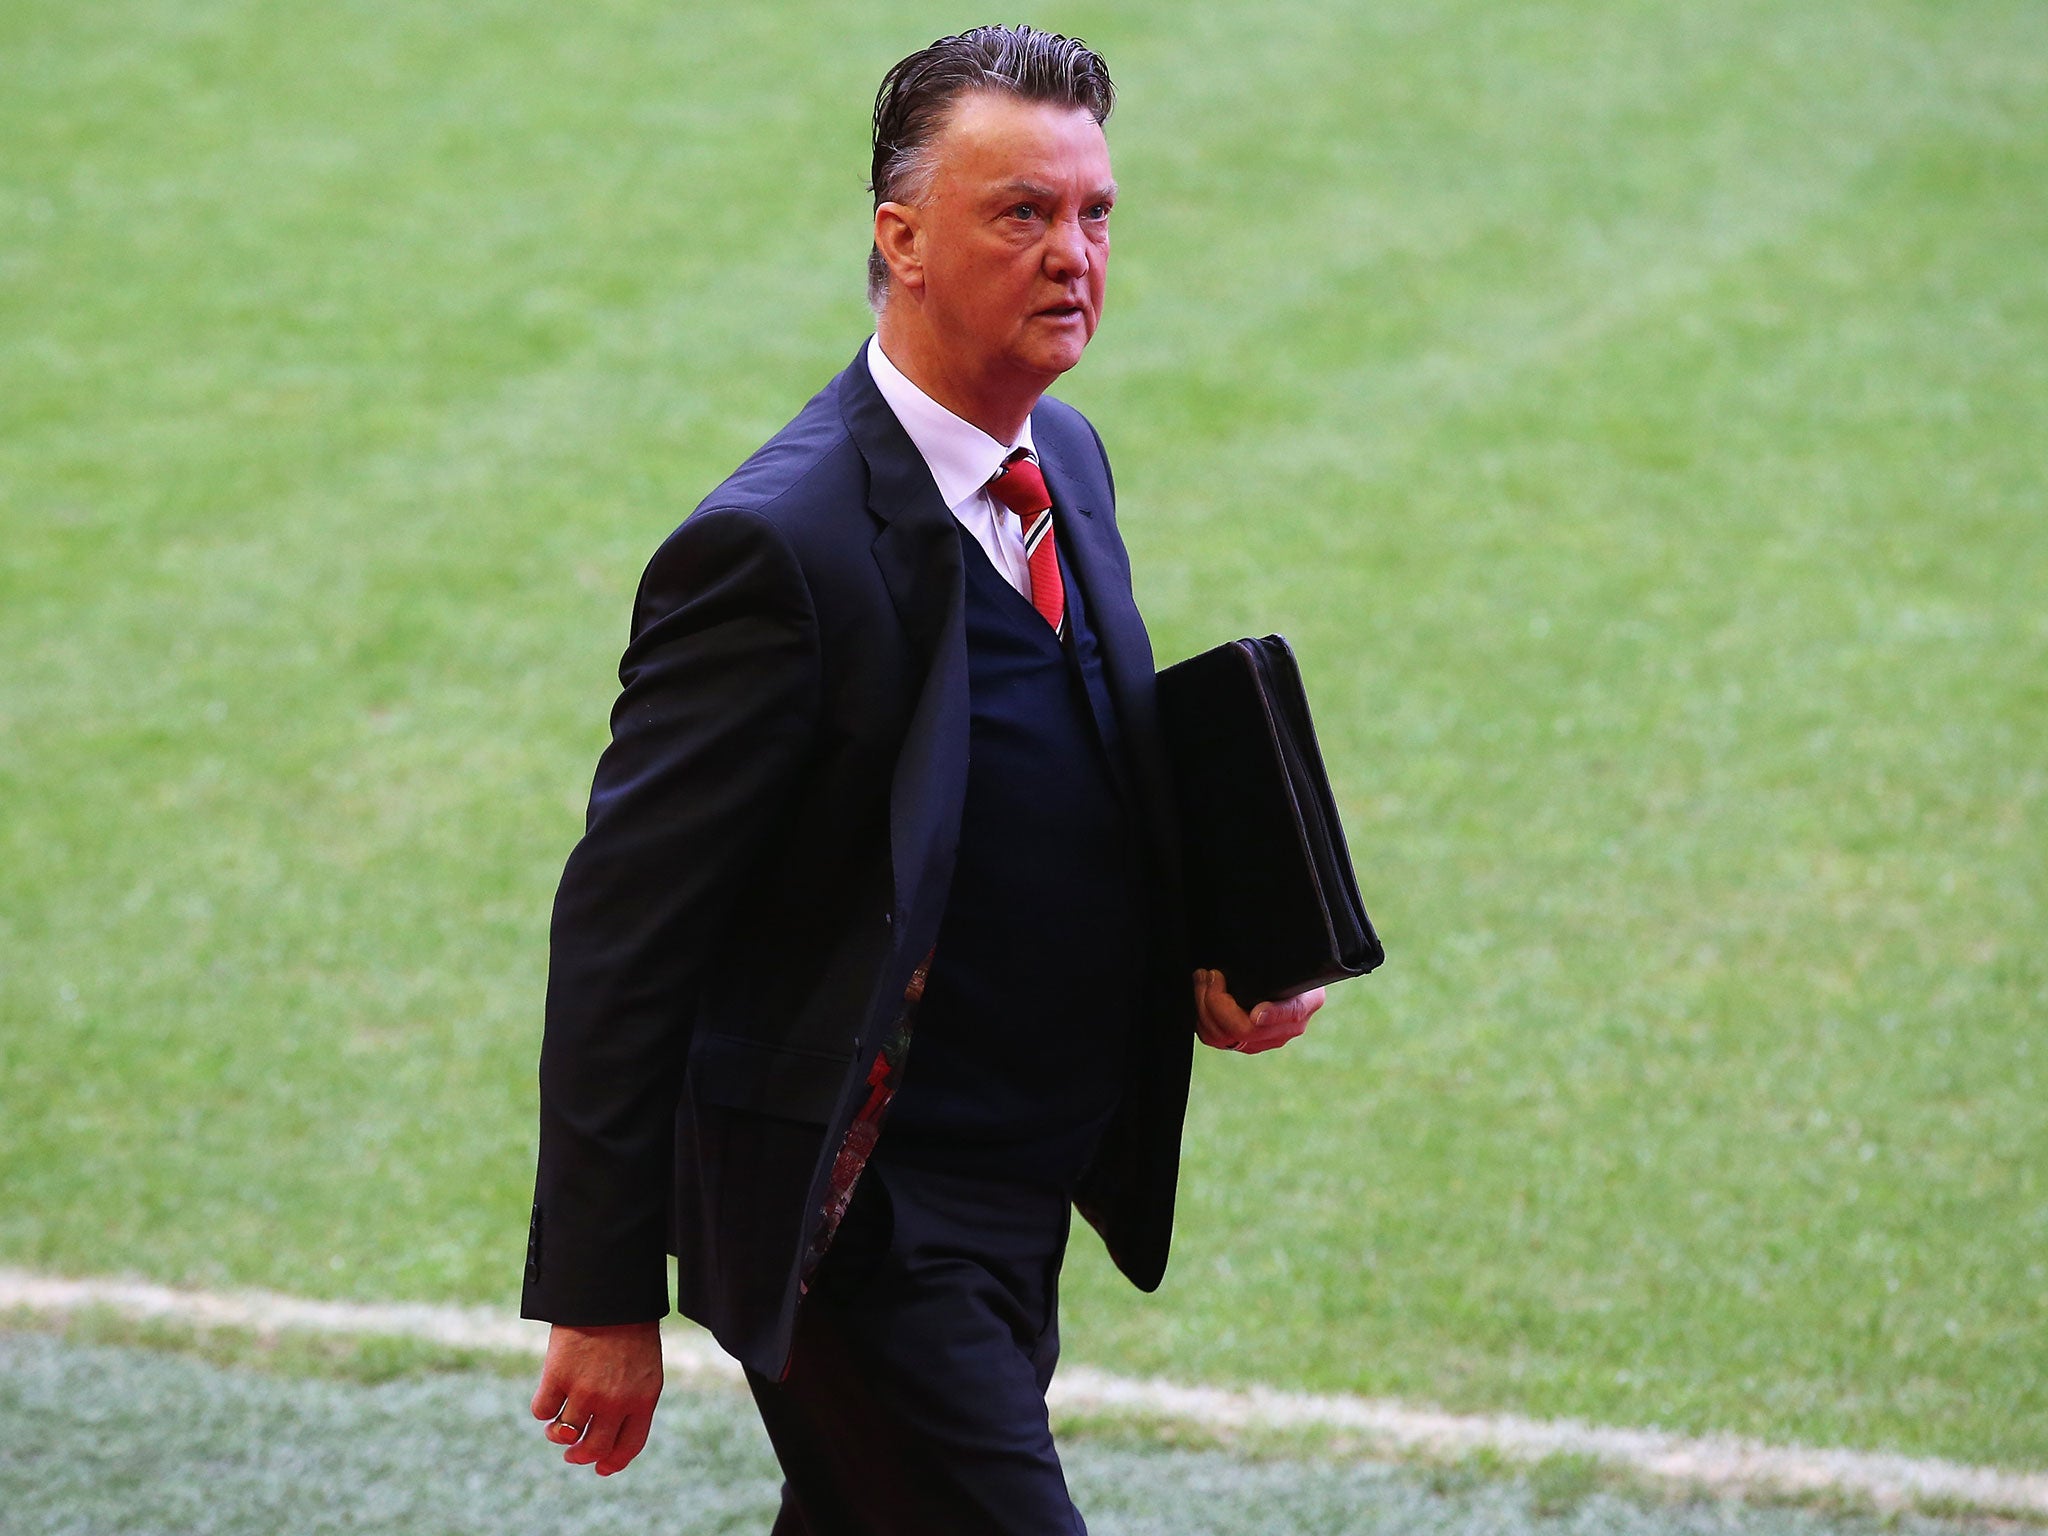 Louis van Gaal is believed to be considering his future as Manchester United manager